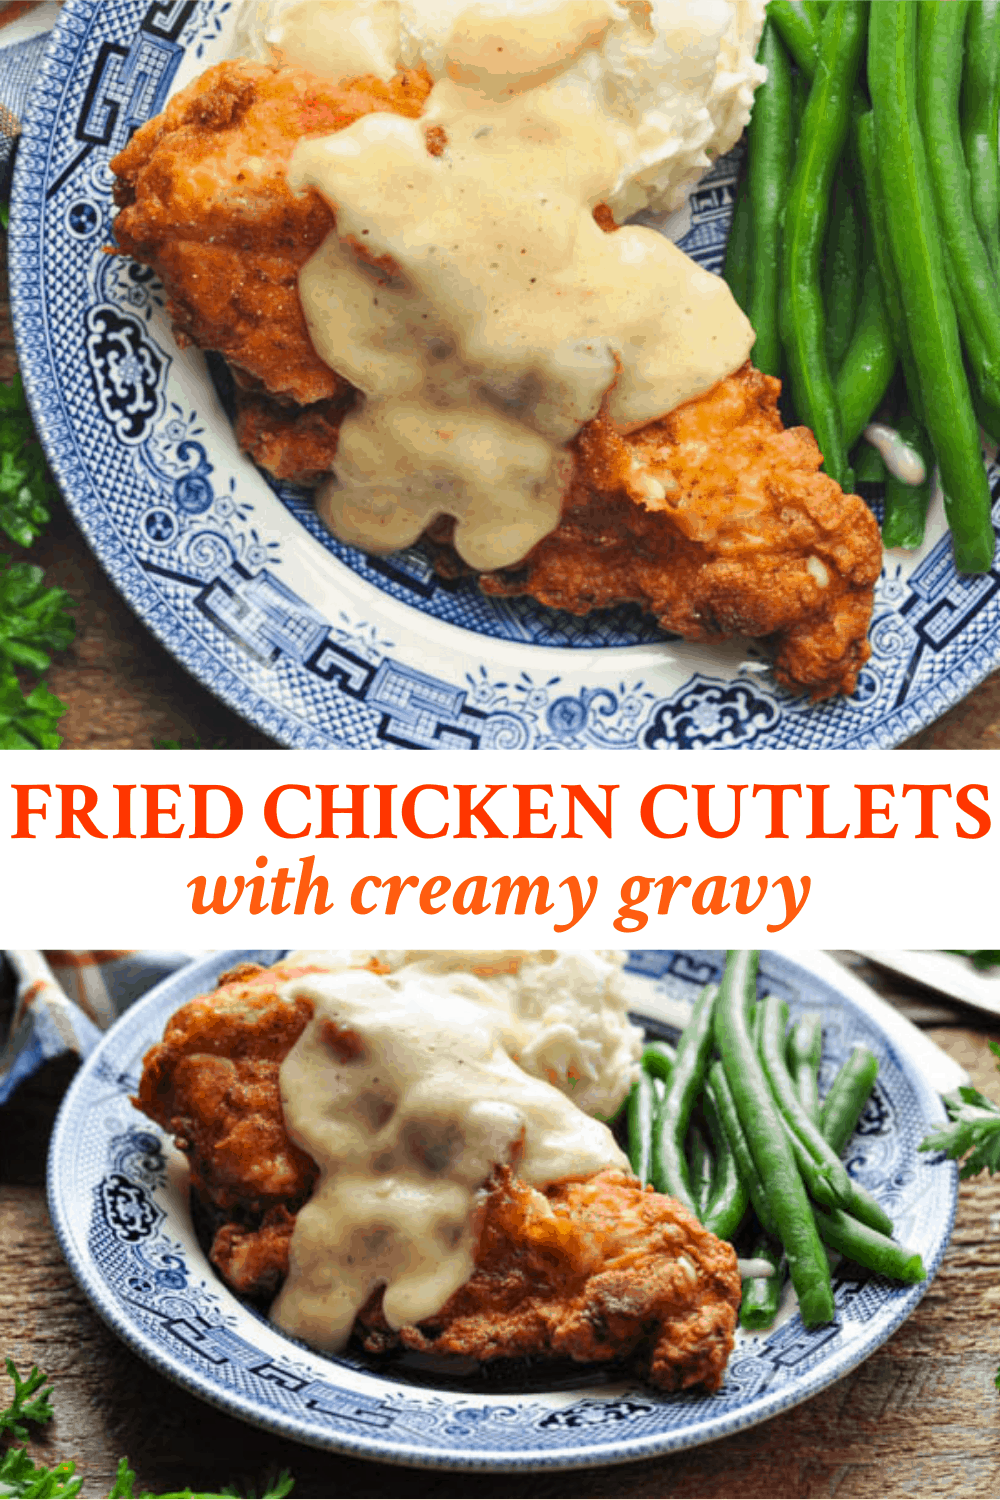 Fried Chicken Cutlets and Country Gravy - The Seasoned Mom